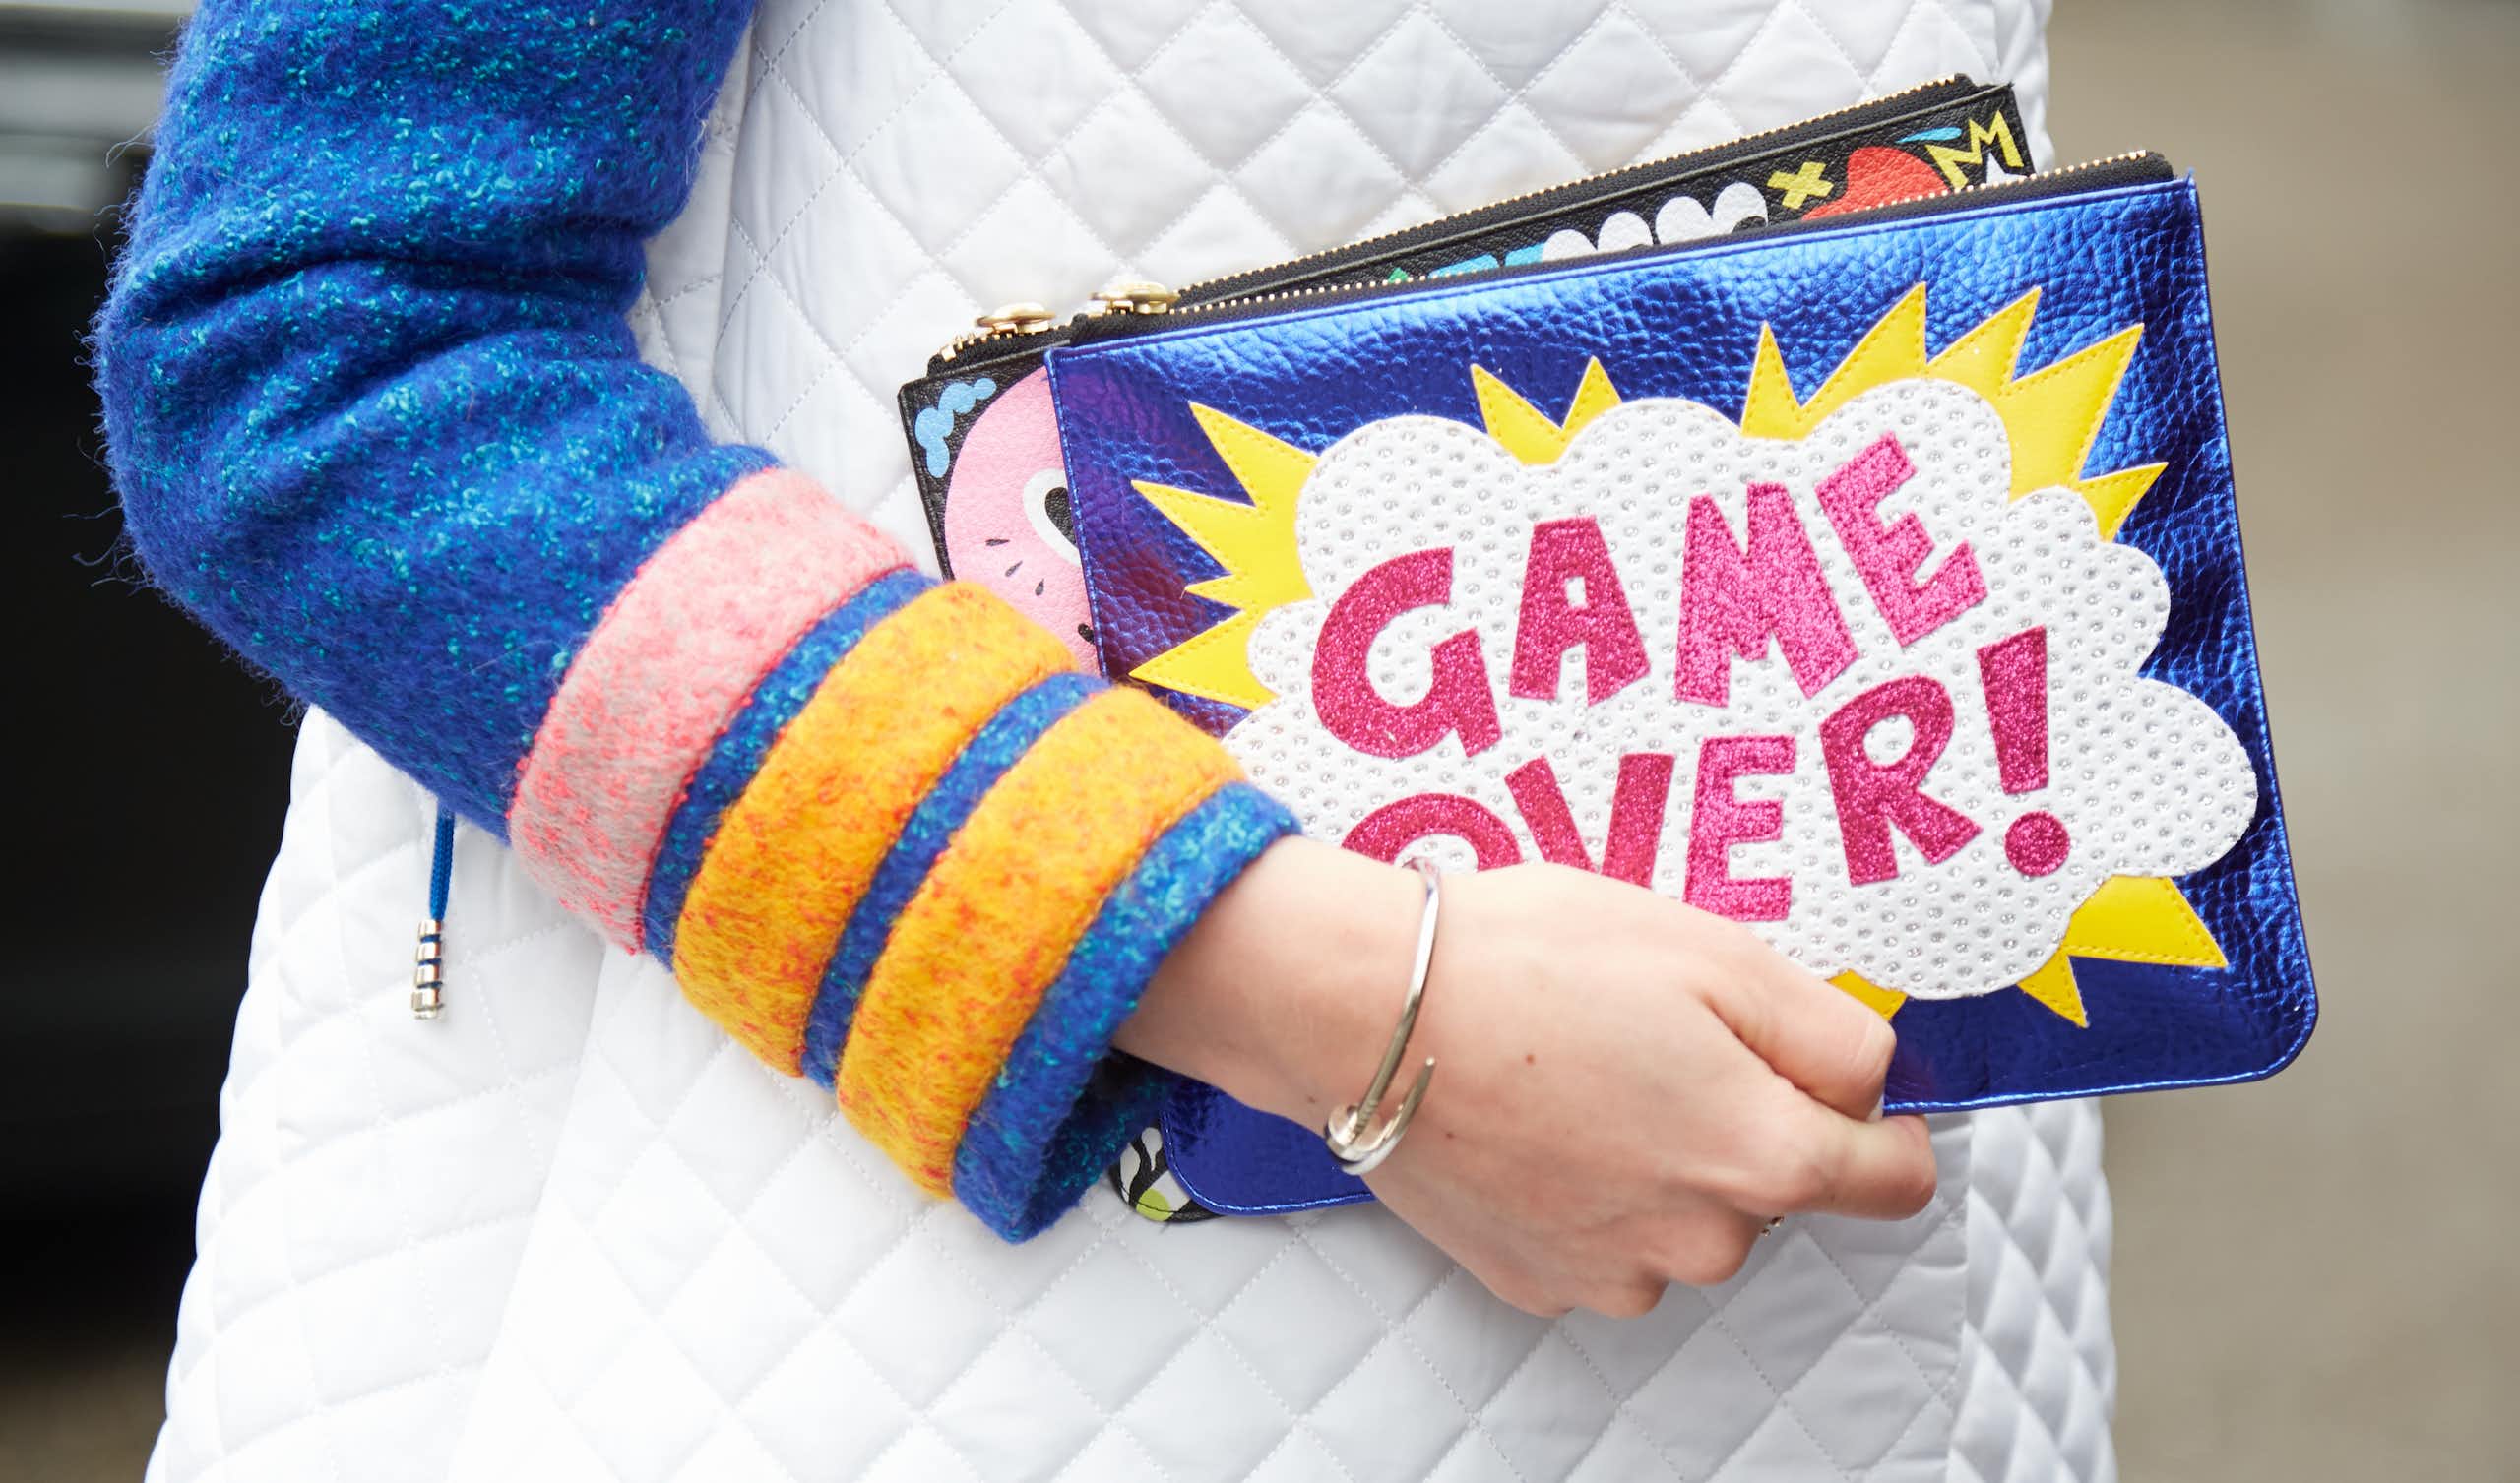 A woman's hand holding a clutch bag that says "GAME OVER!"